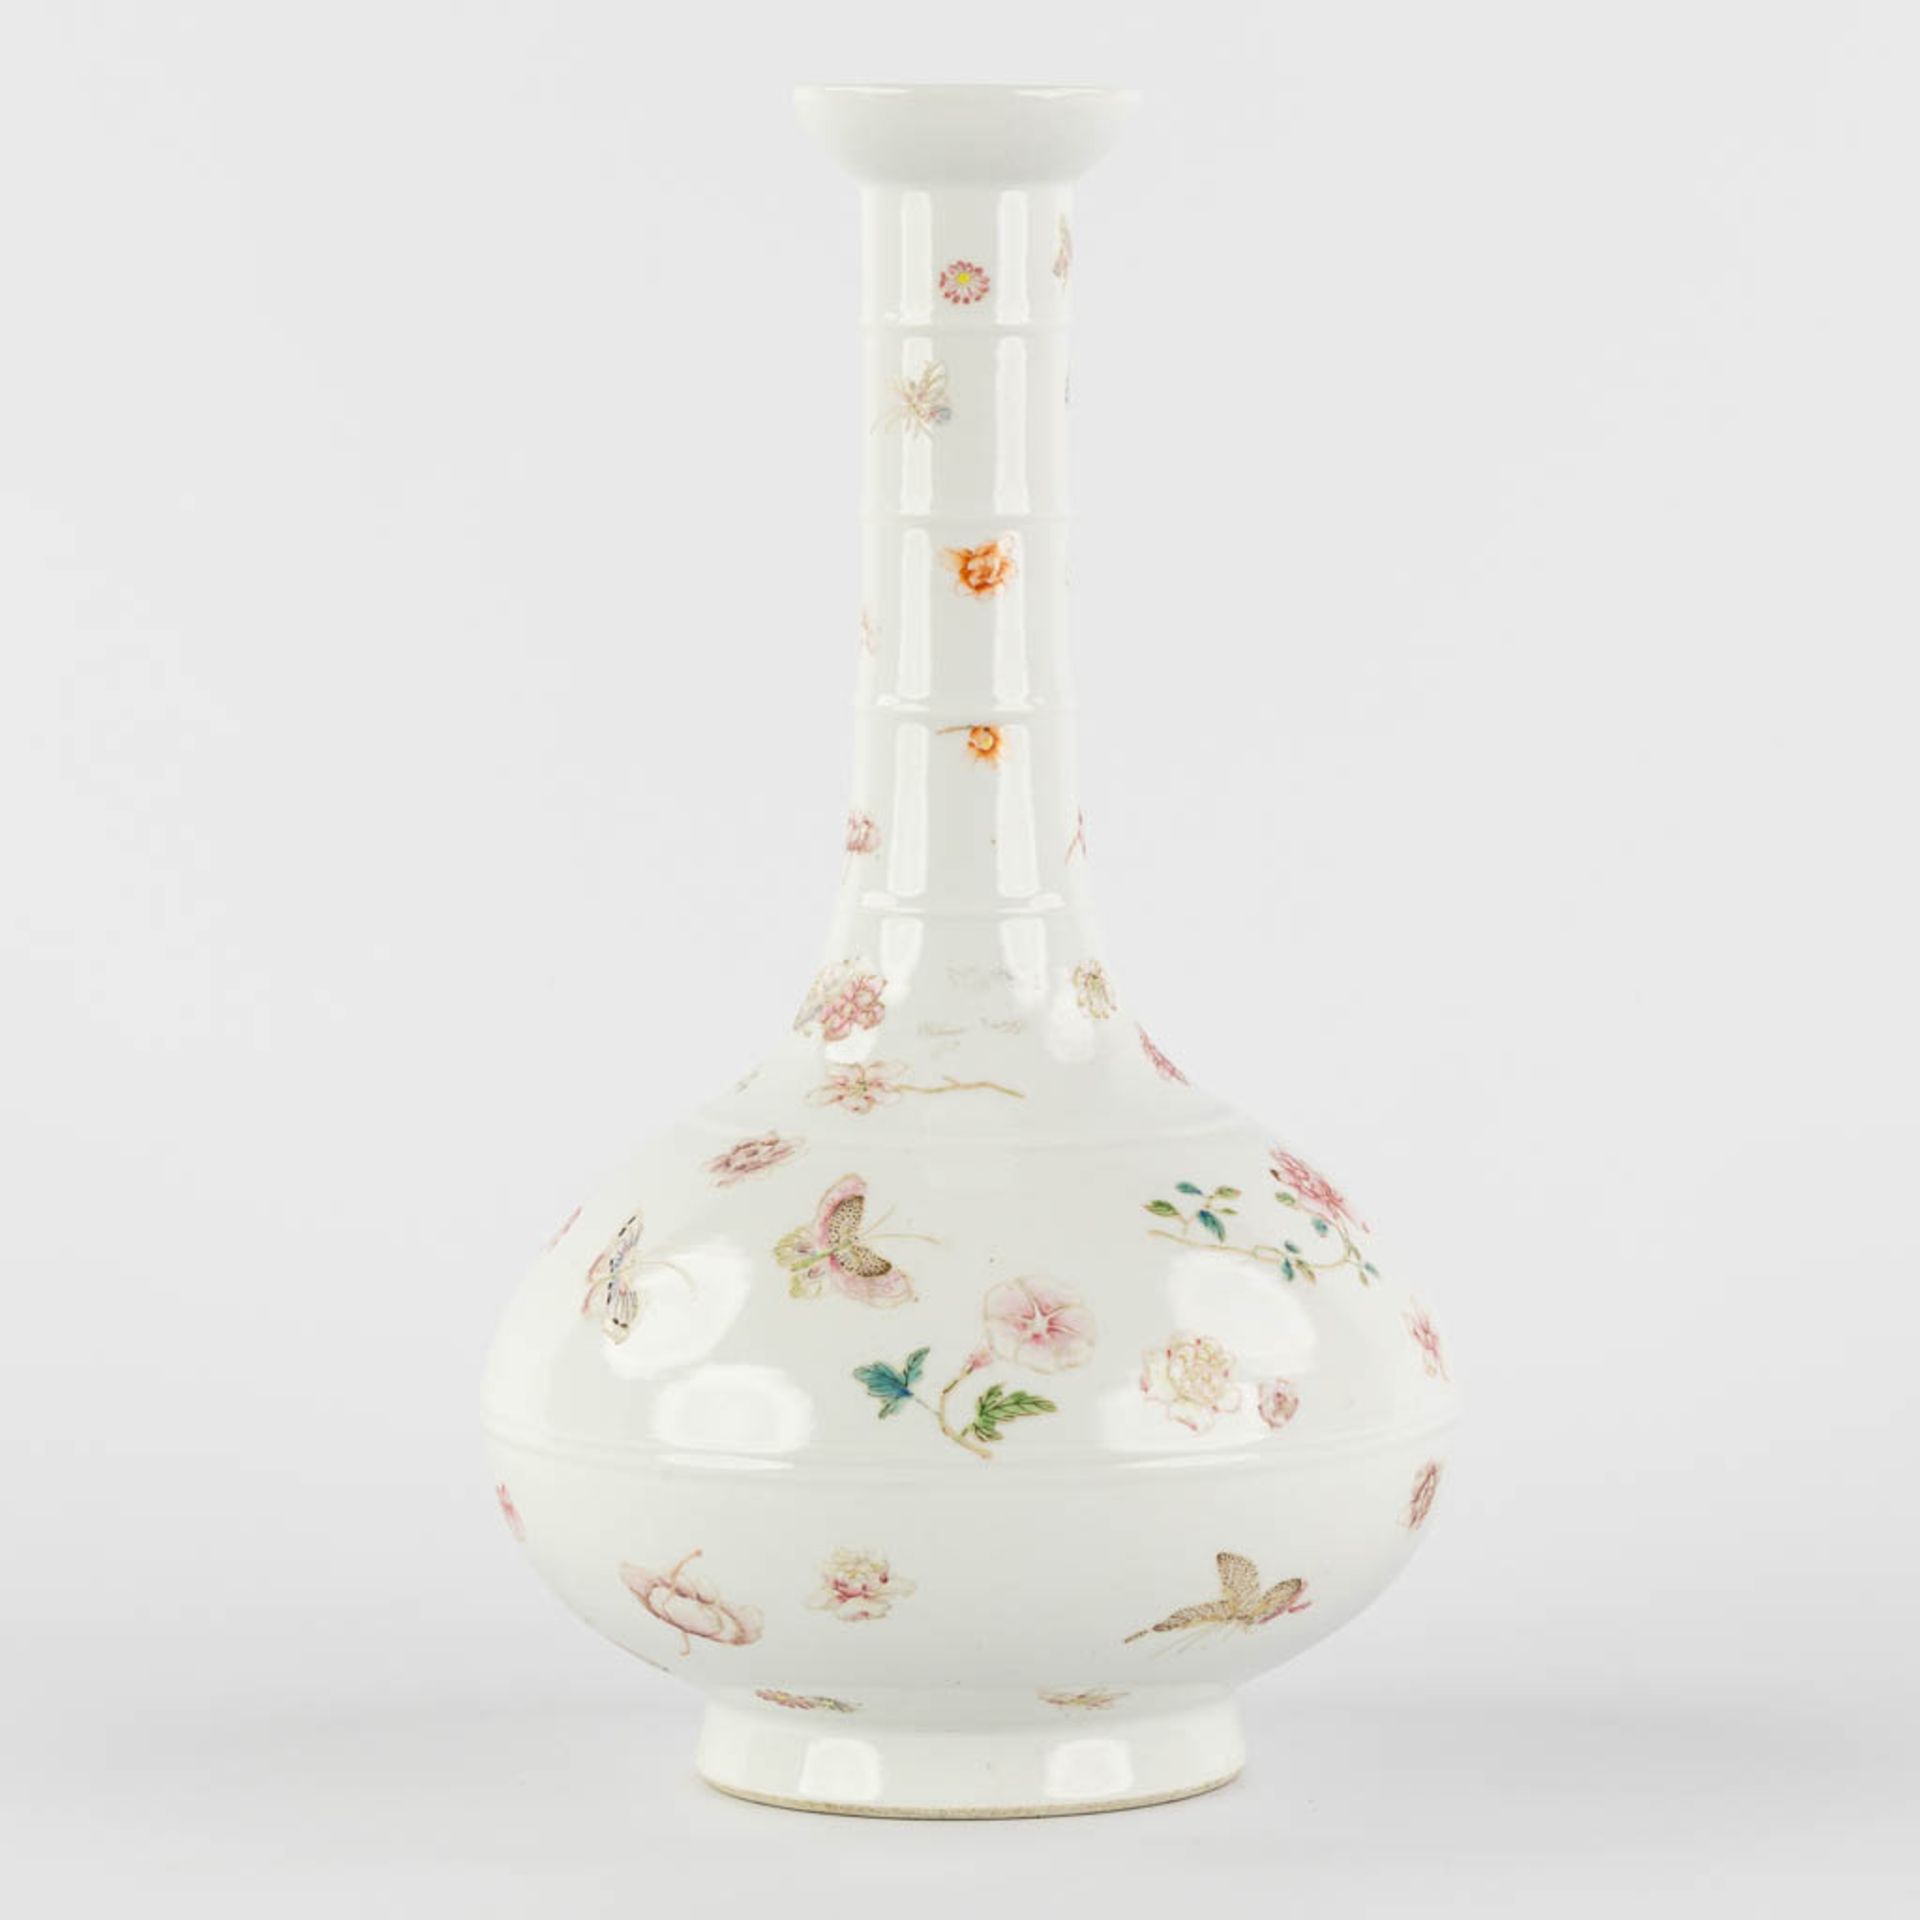 An unusual Chinese Famille Rose vase, decorated with butterflies, Yonghzeng mark, 19th C. (H:31 x D: